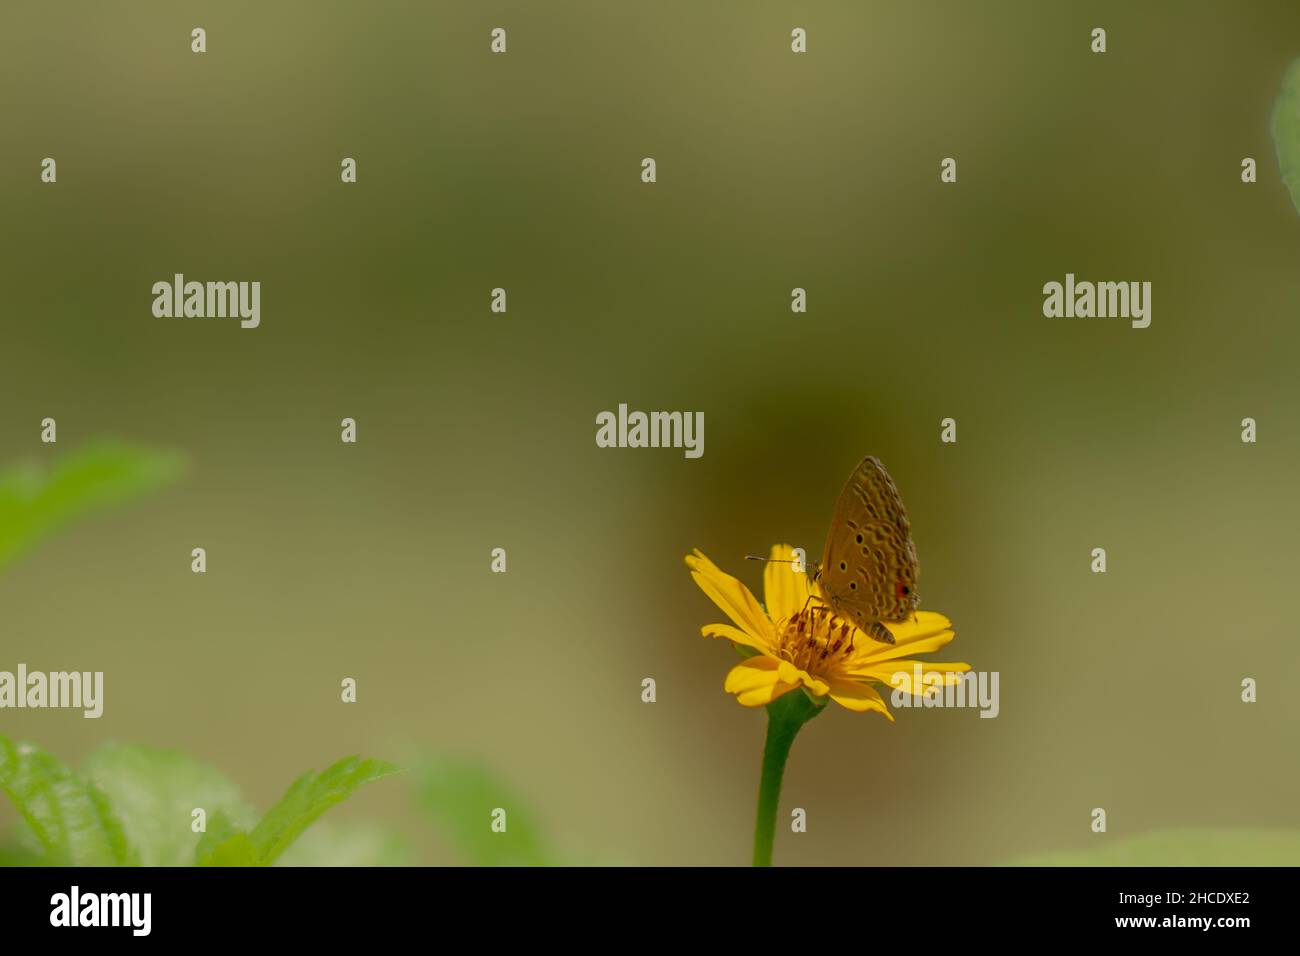 A brown butterfly looking for honey and perched on a yellow creeping buttercup flower blurred green foliage background, nature concept Stock Photo